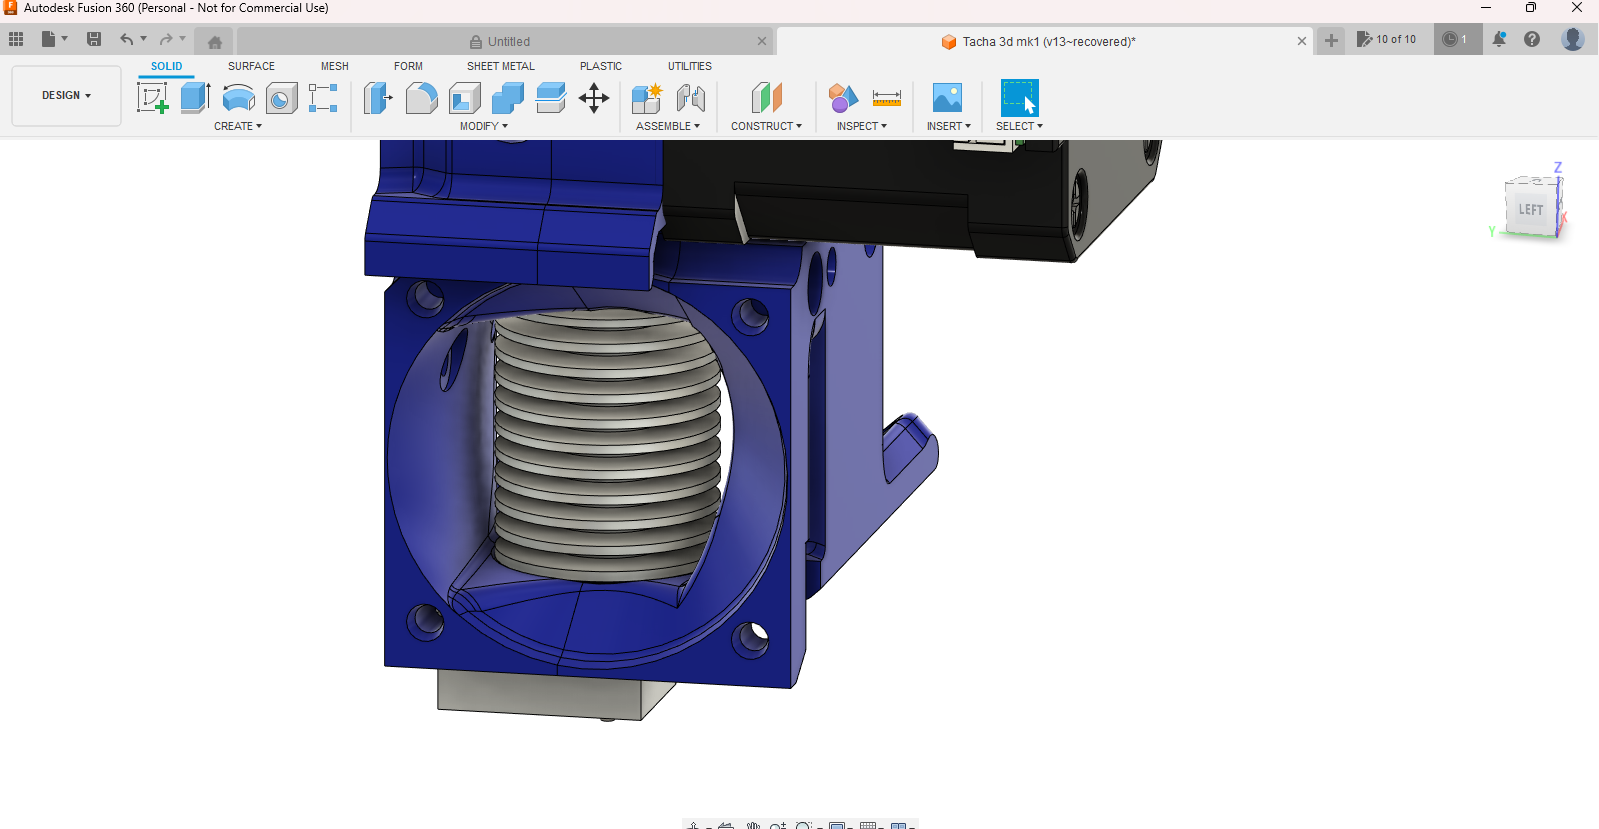 Autodesk Fusion 360 (Personal - Not for Commercial Use) 6_29_2023 10_04_08 PM.png